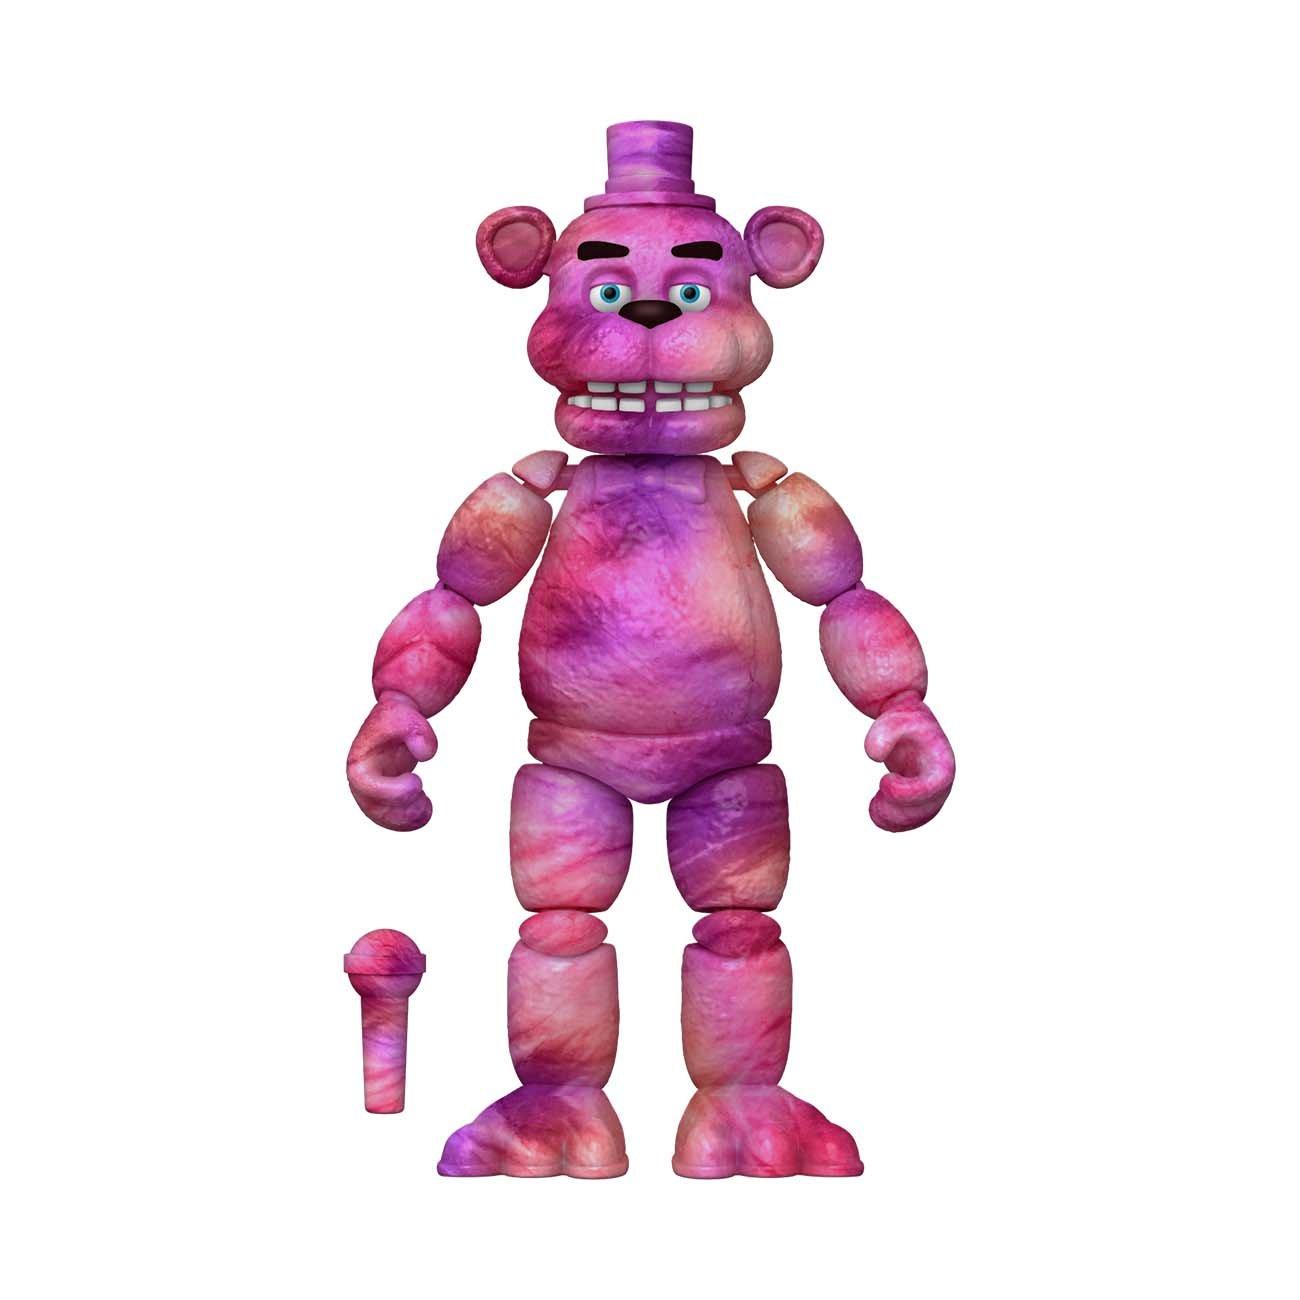 Five Nights at Freddy's Action Figures in Action Figures 